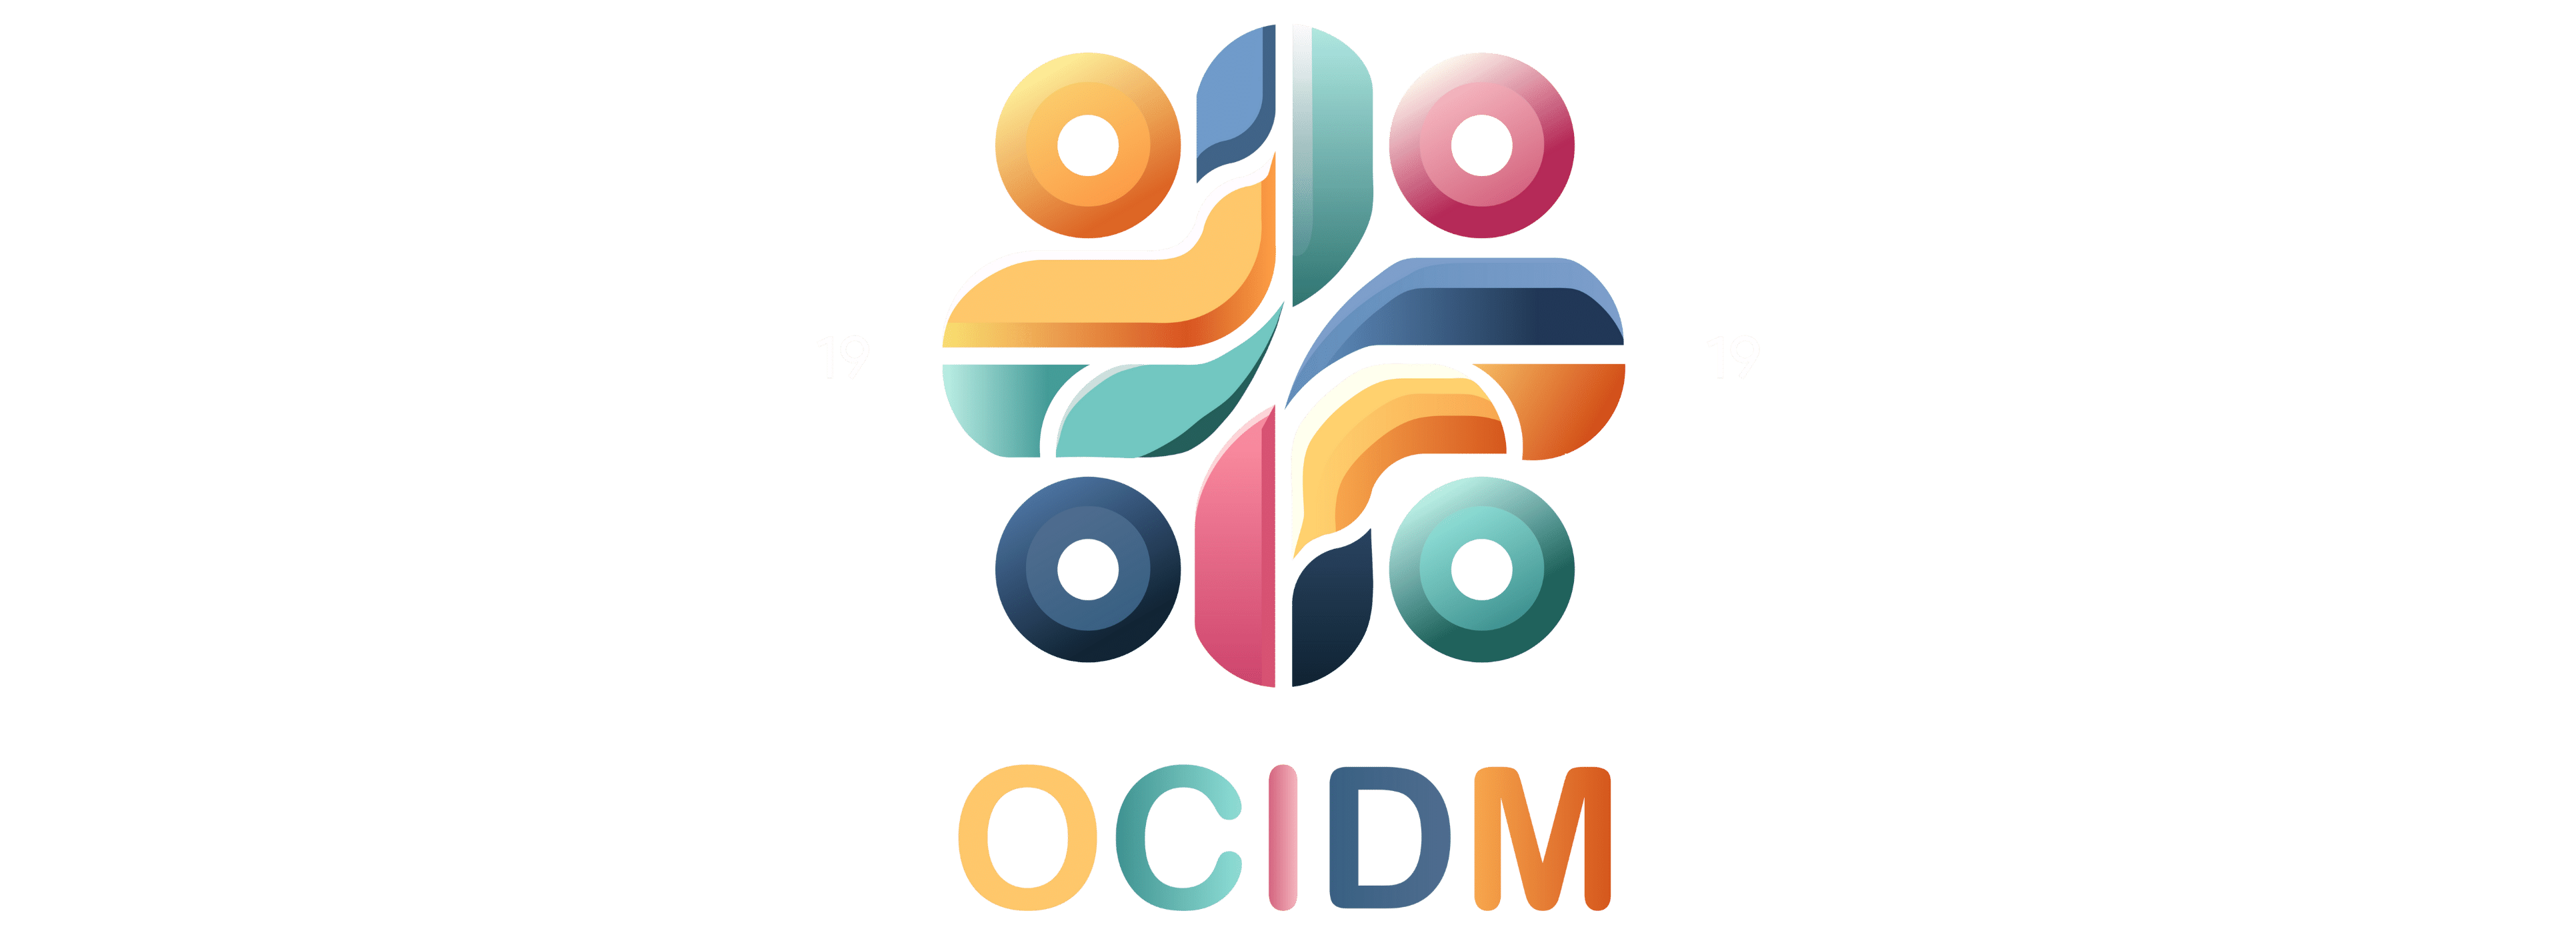 Abstract geometric logo with pastel colors and the text "ocidm" below. Toronto Caribana Carnival: Ultimate Guide to Caribana Festival Events